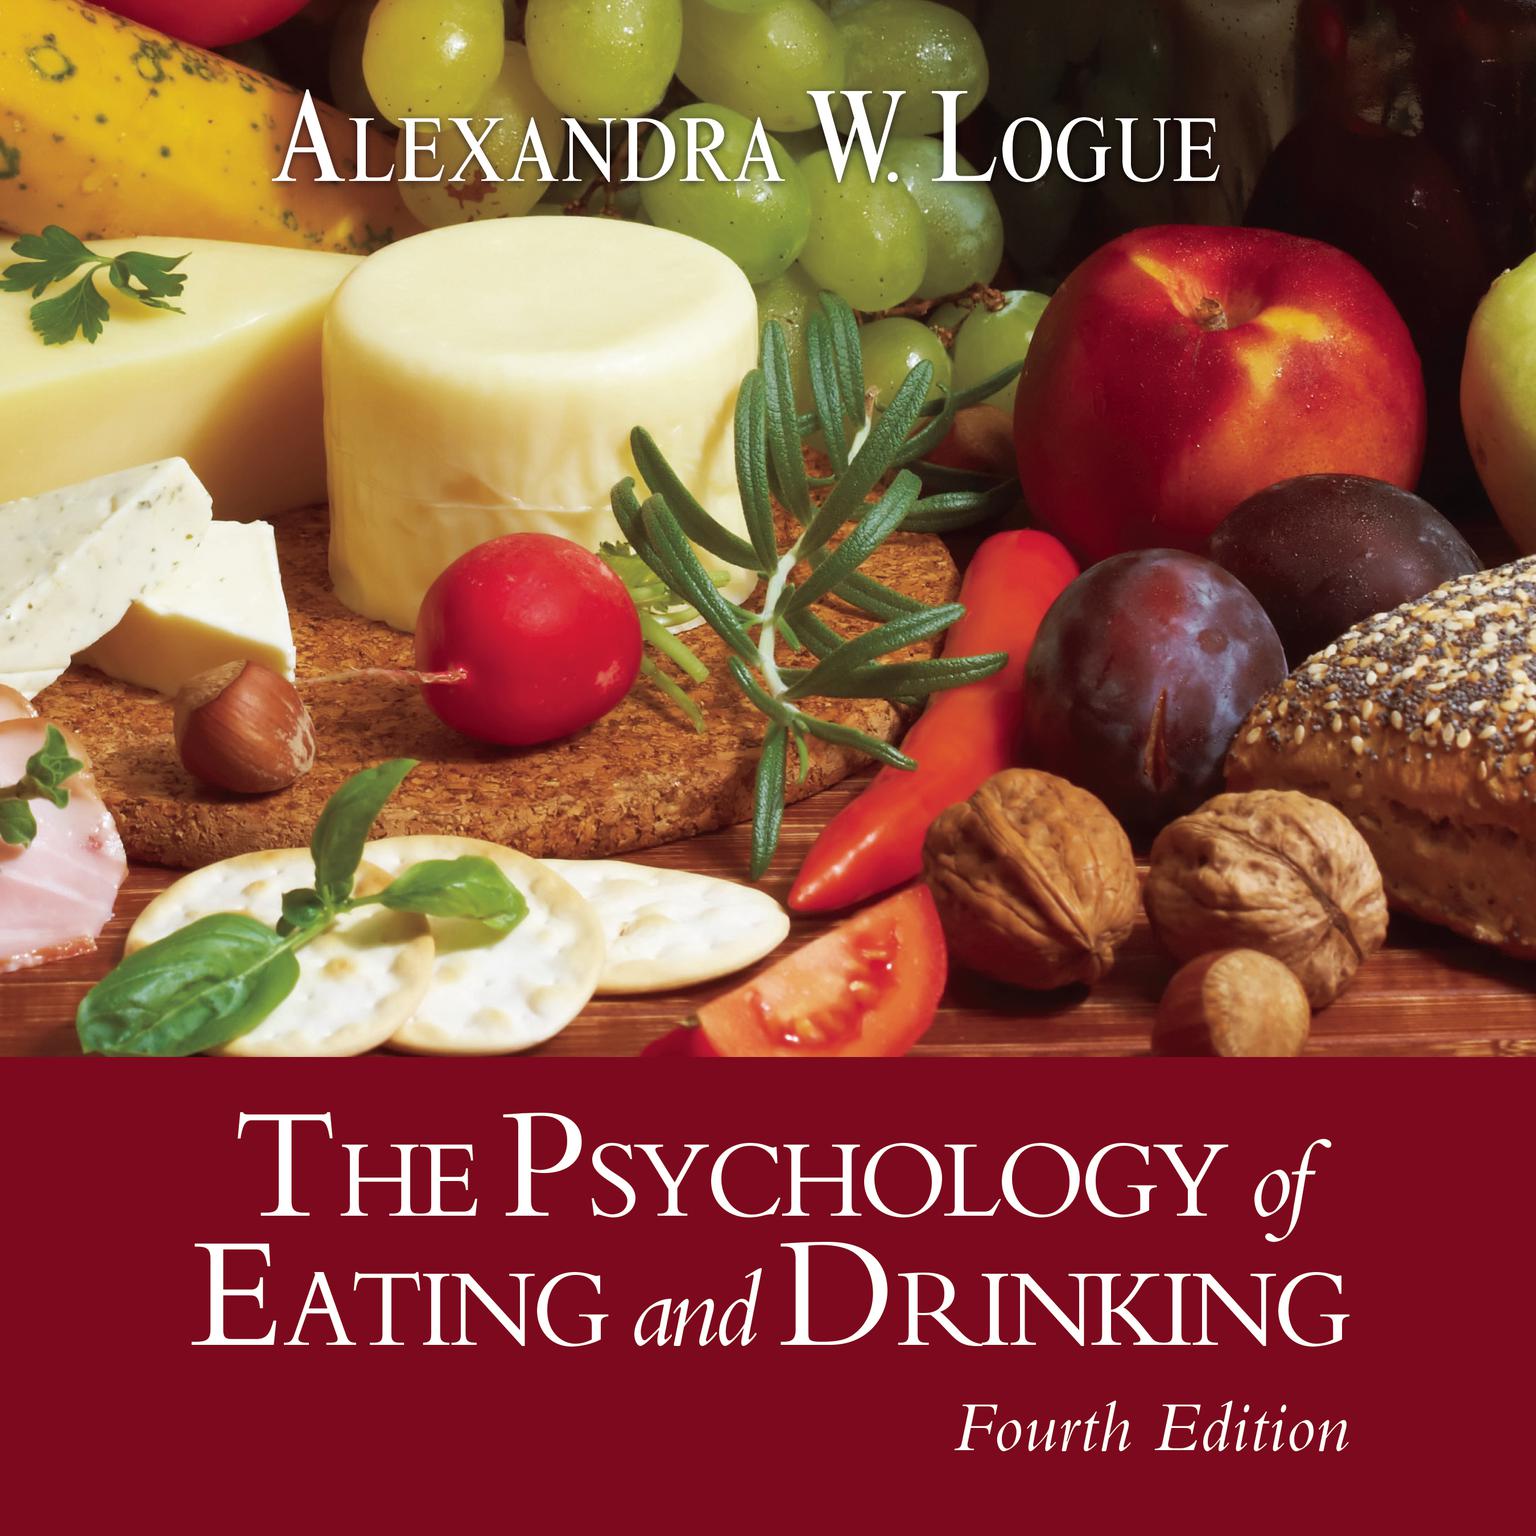 The Psychology of Eating and Drinking Fourth Edition Audiobook, by Alexandra W. Logue